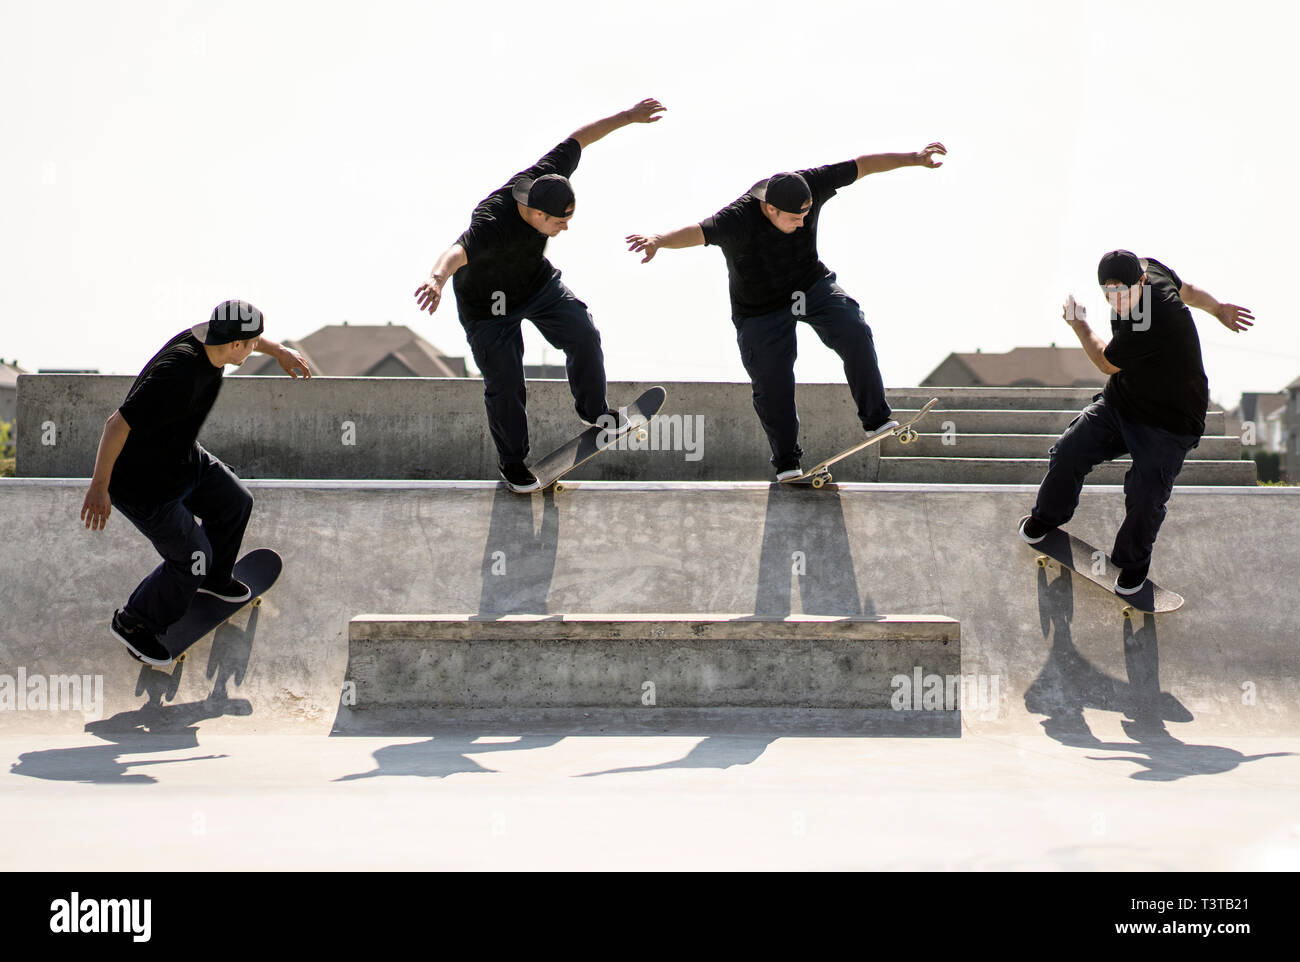 Movement Sequence Skate High Resolution Stock Photography and Images - Alamy